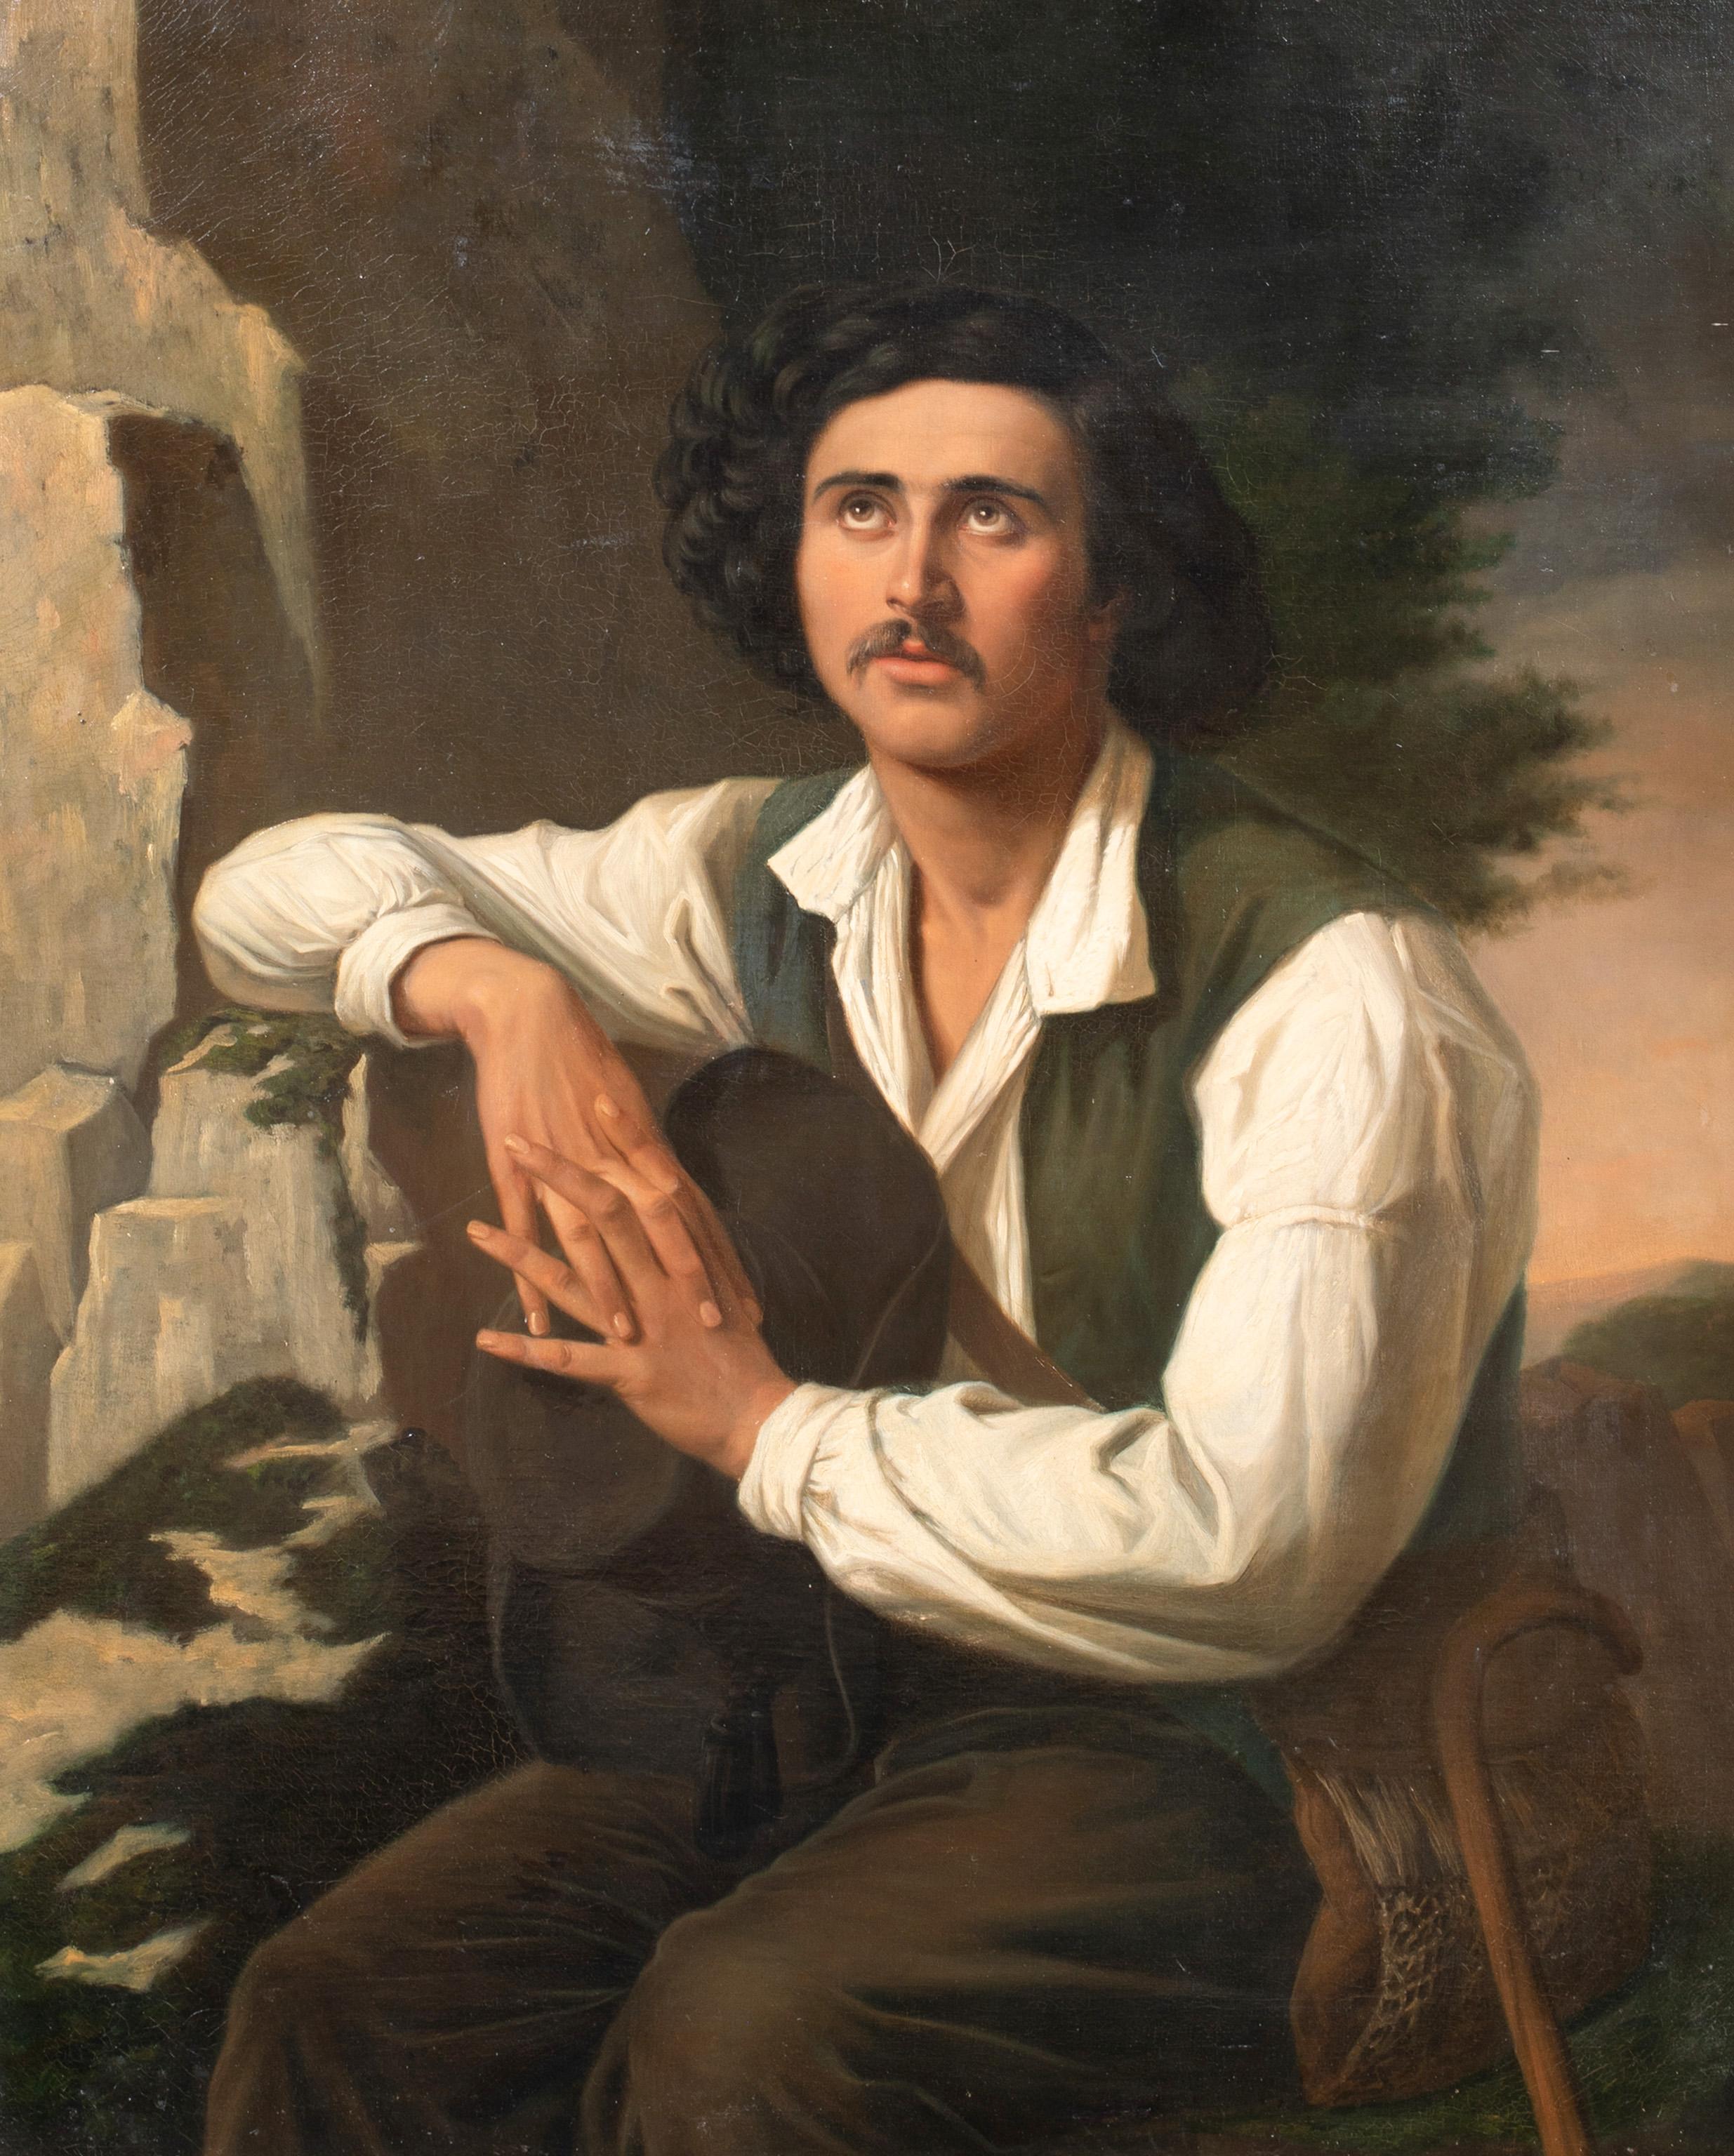 Portrait Of An Gentleman In The Mountains, 19th Century - Painting by Unknown